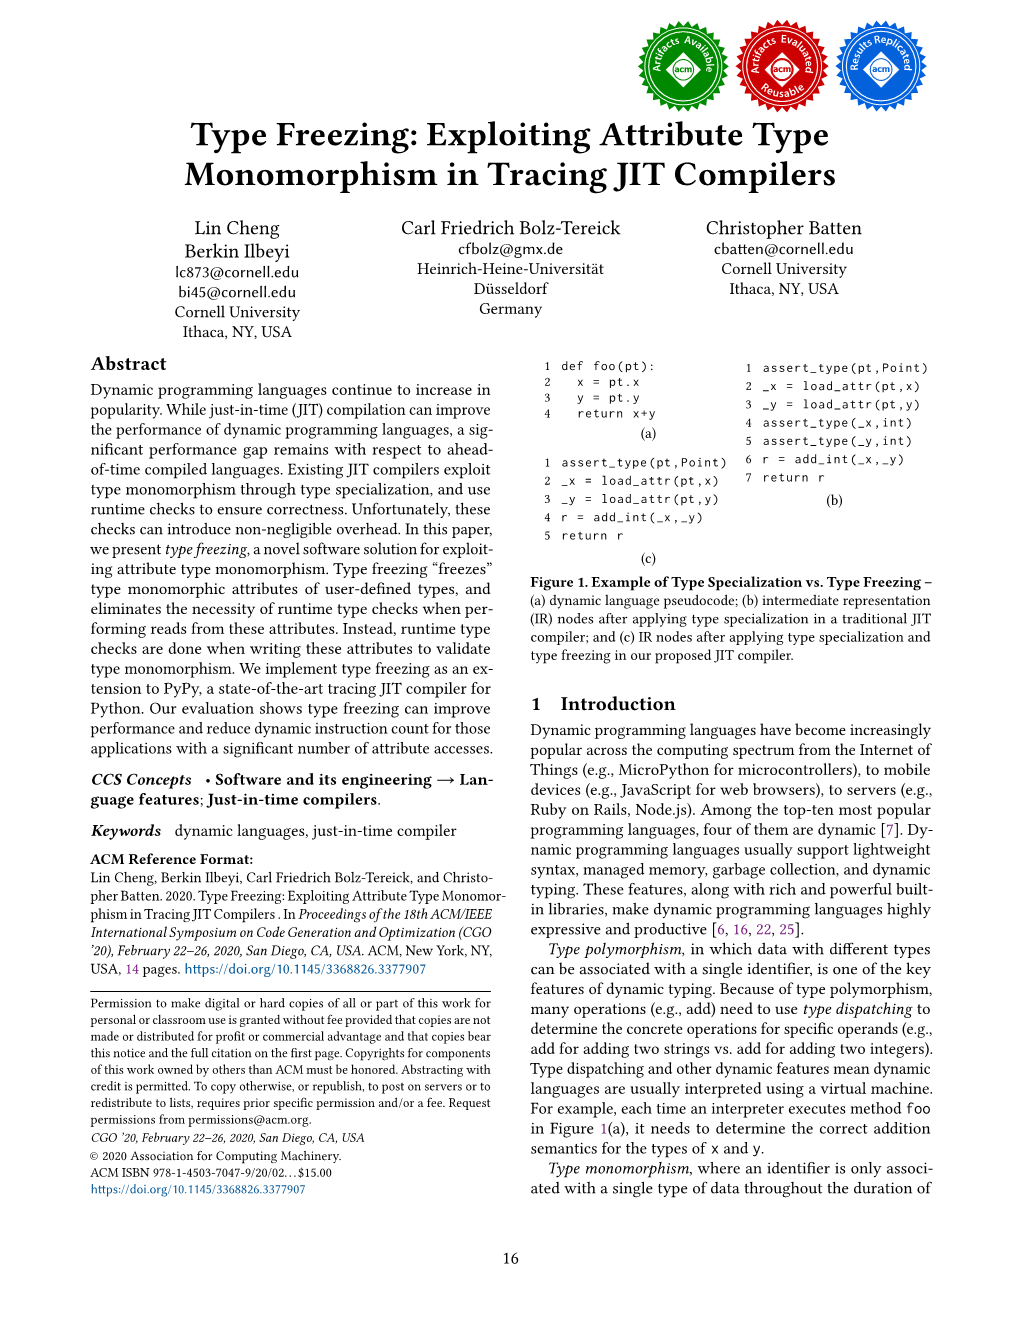 Type Freezing: Exploiting Attribute Type Monomorphism in Tracing JIT Compilers